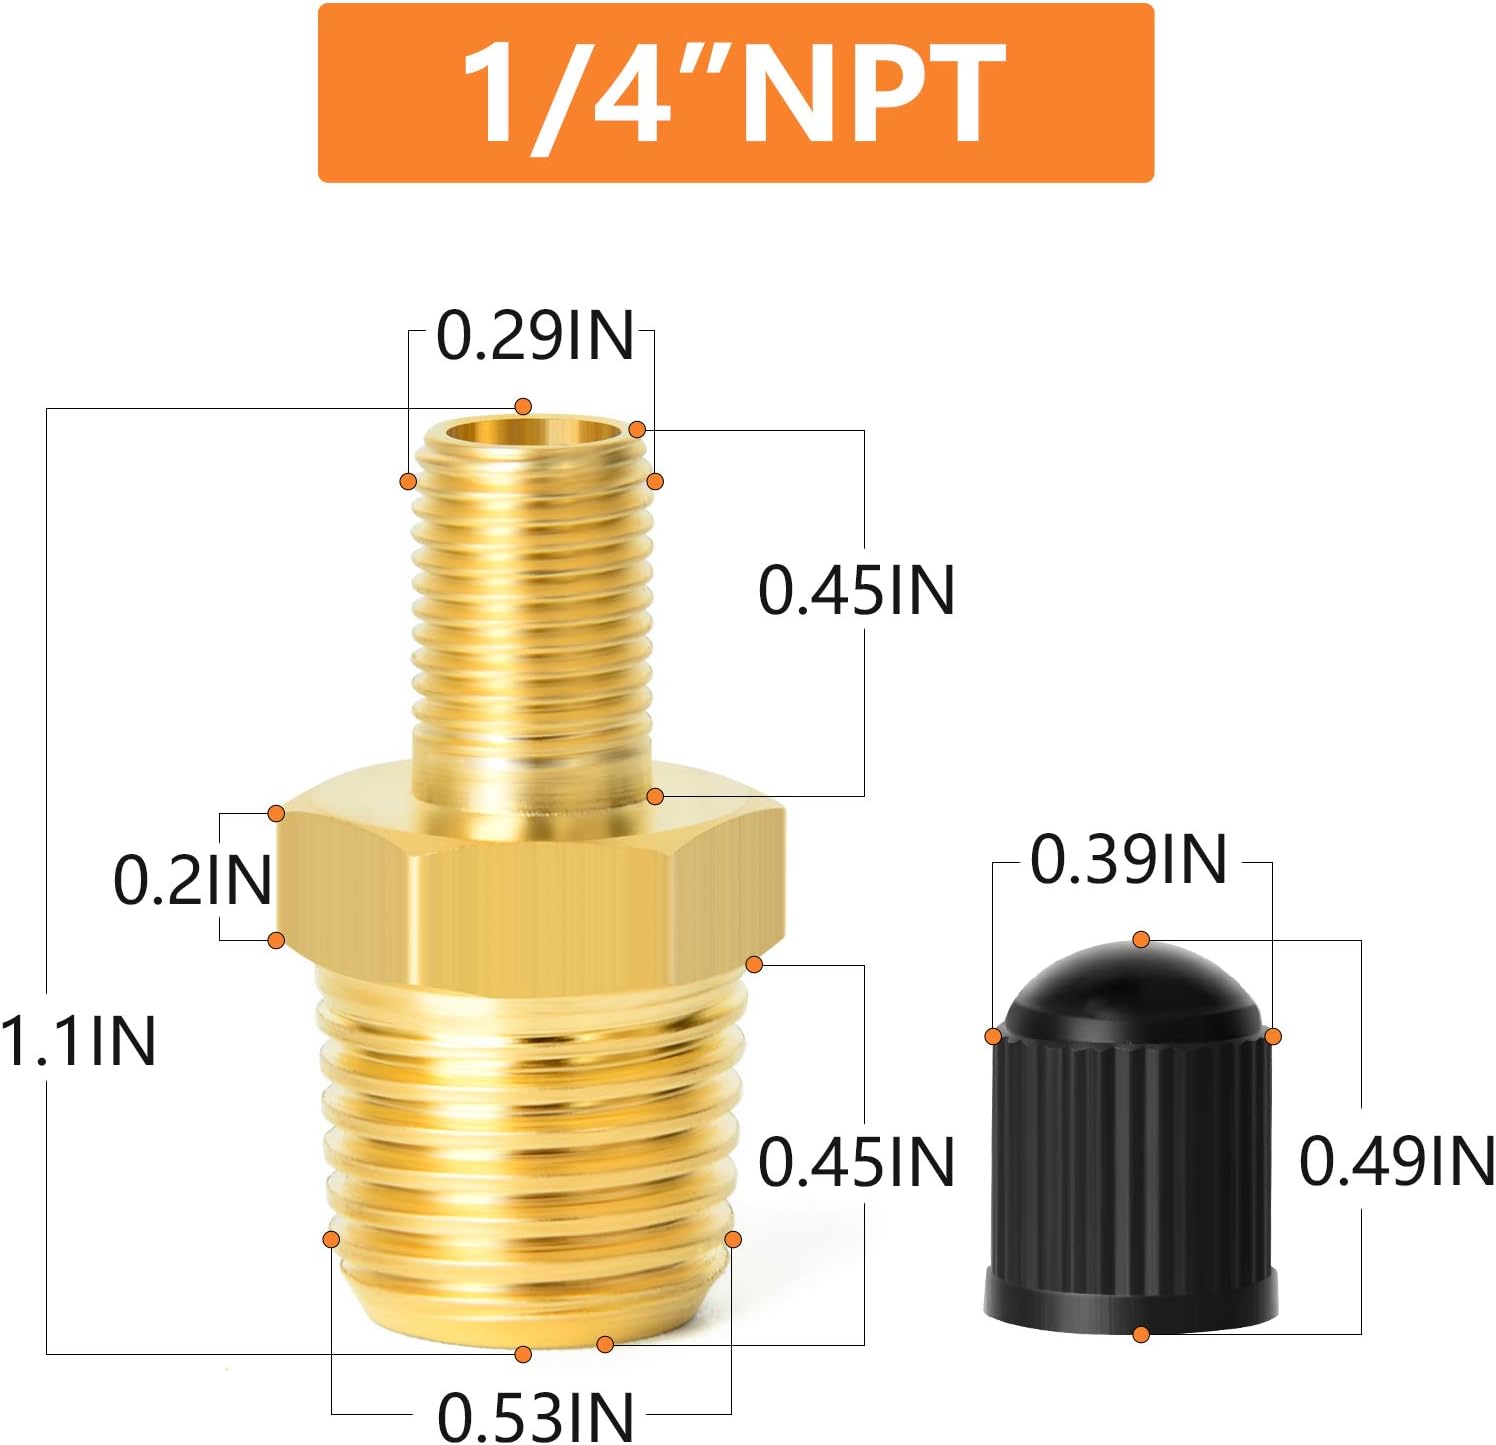 Gasher 2PCS 1/4" NPT Tank Valve Anti-Corrosion Brass Schrader Valve with 1/4" Male NPT,Using with Air Compressor Tanks